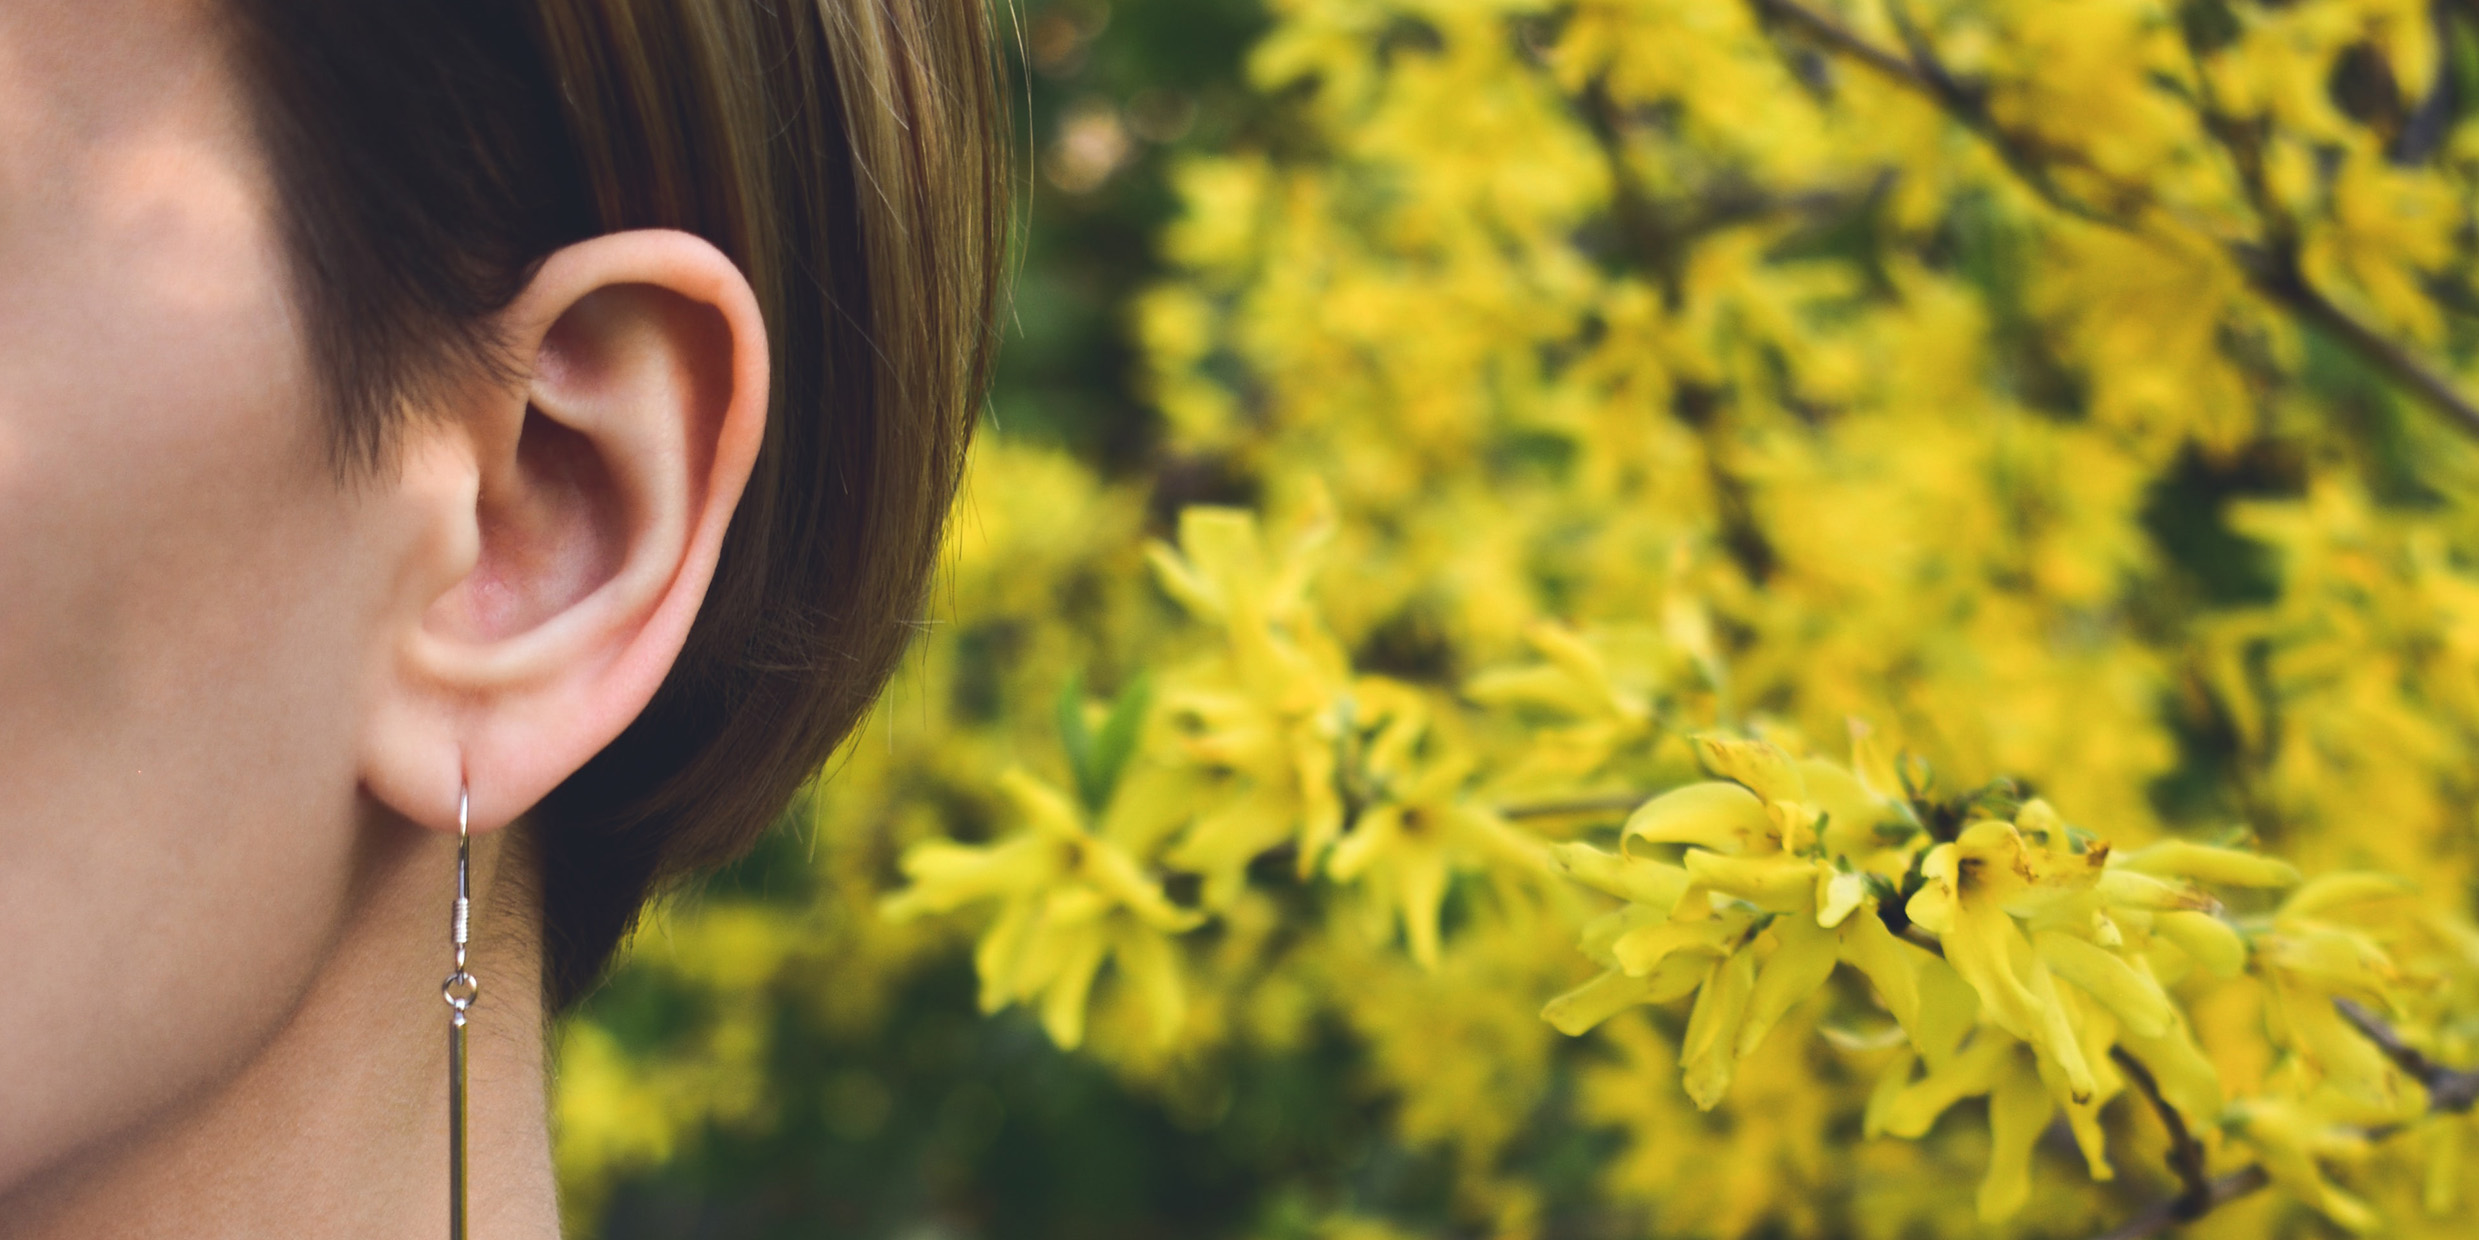 Close-up image of woman's ear with flowers in the background